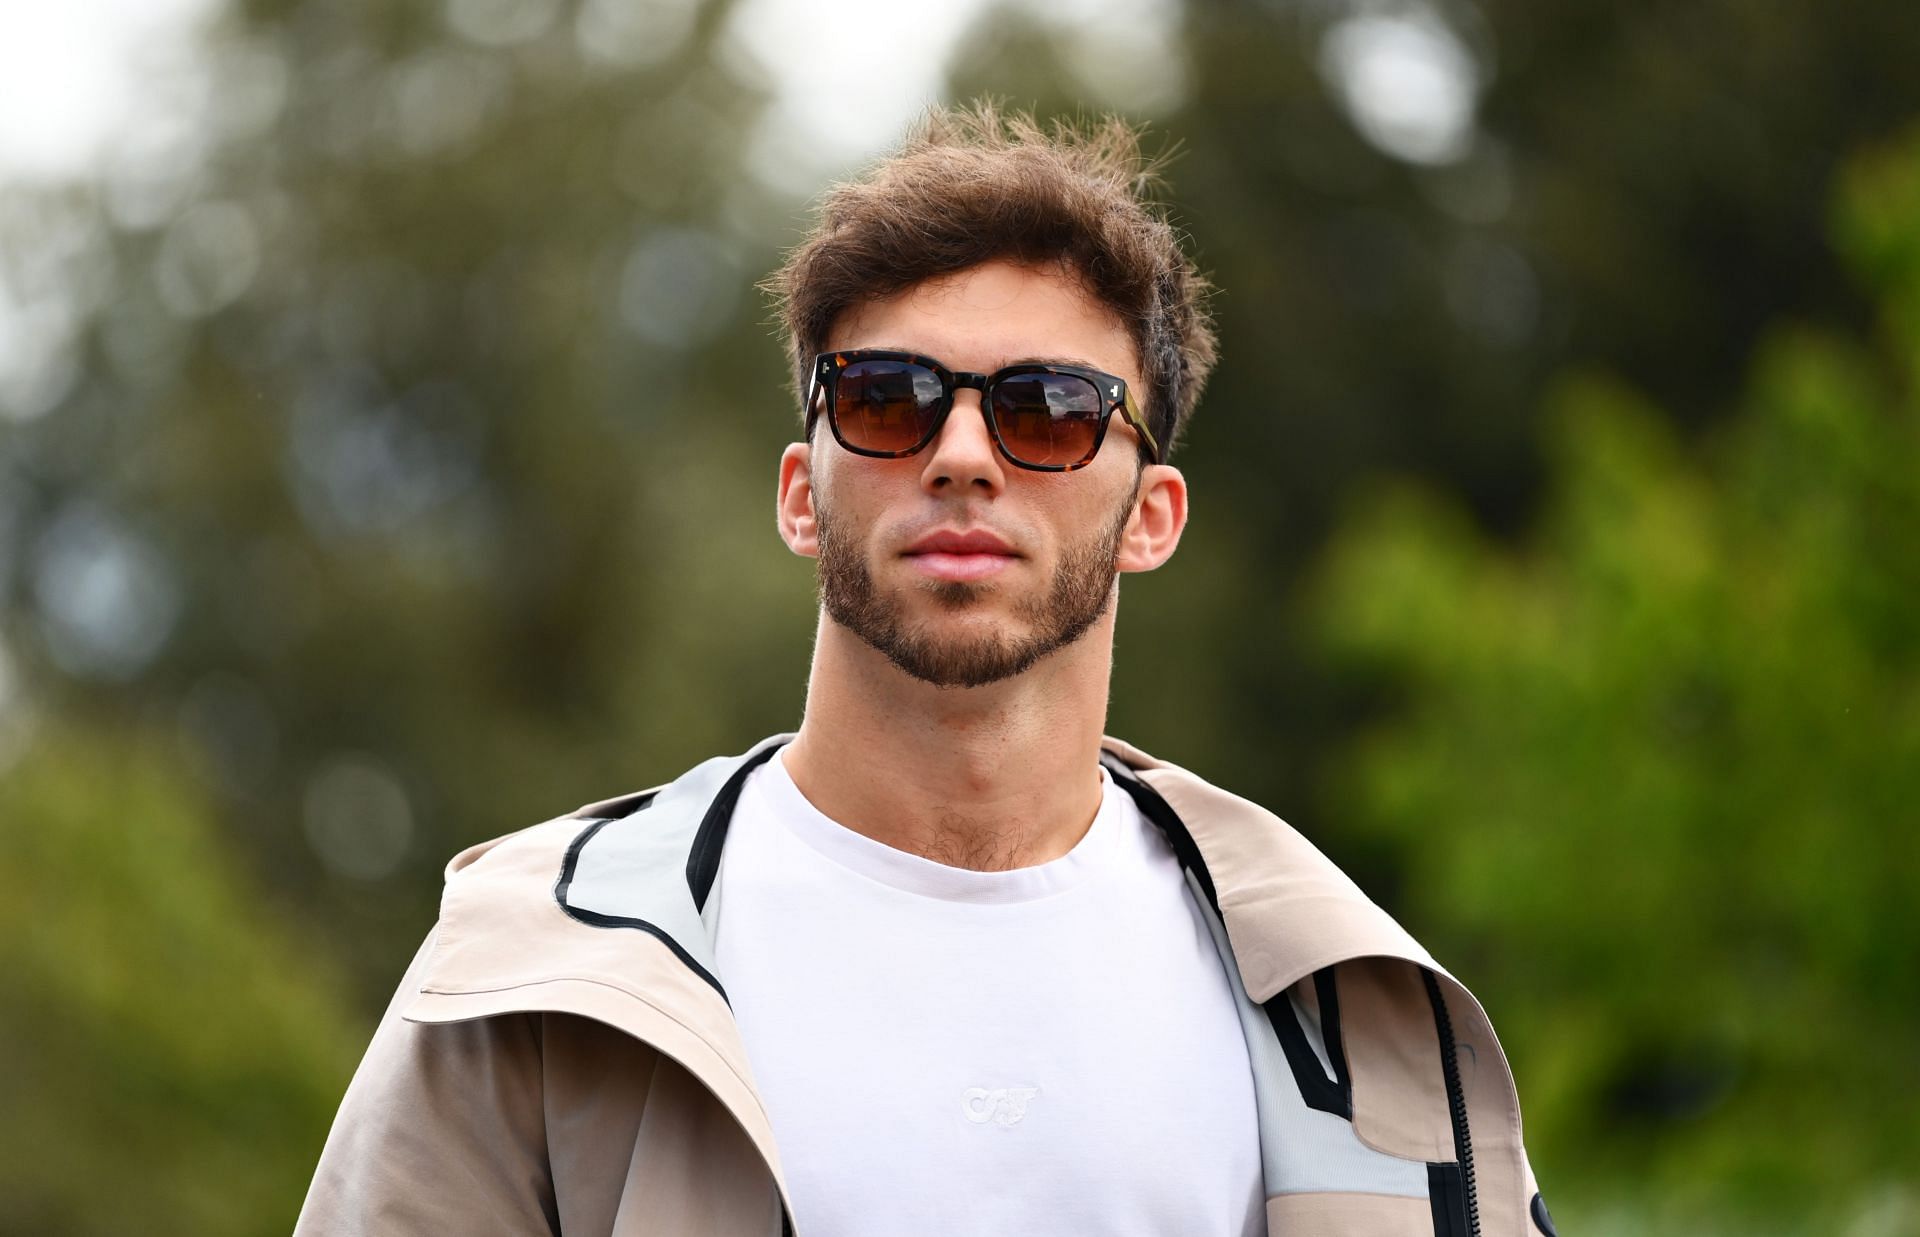 Red Bull brought Pierre Gasly into F1 in 2017